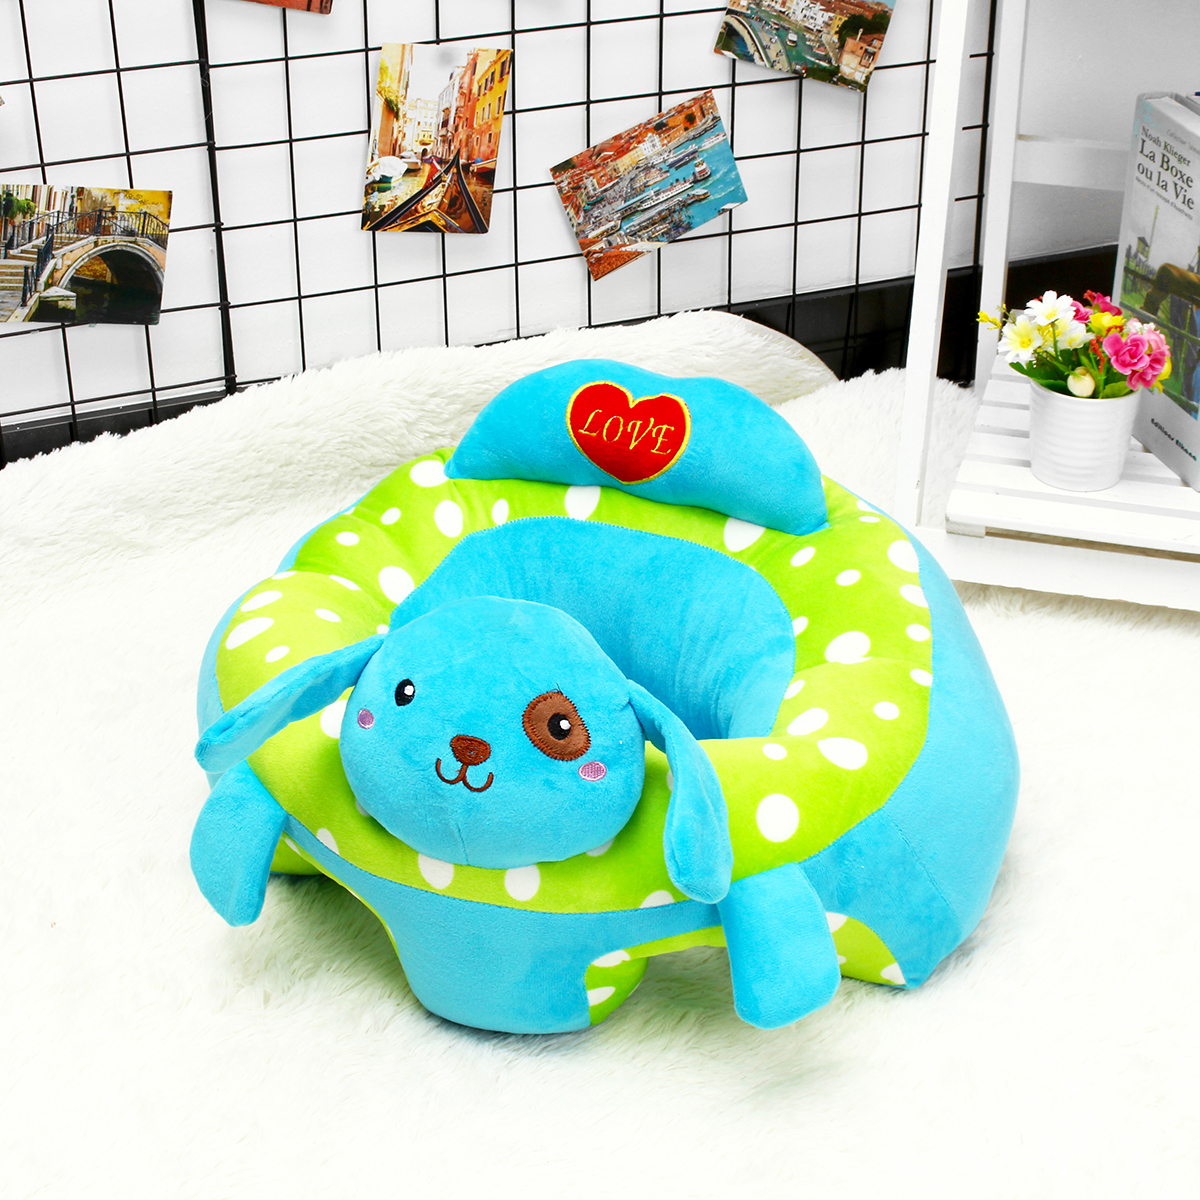 Baby-Soft-Learn-Sitting-Chair-Cushion-Training-Inflatable-Seat-Nursing-Pillows-Child-Safety-Seat-Bel-1422245